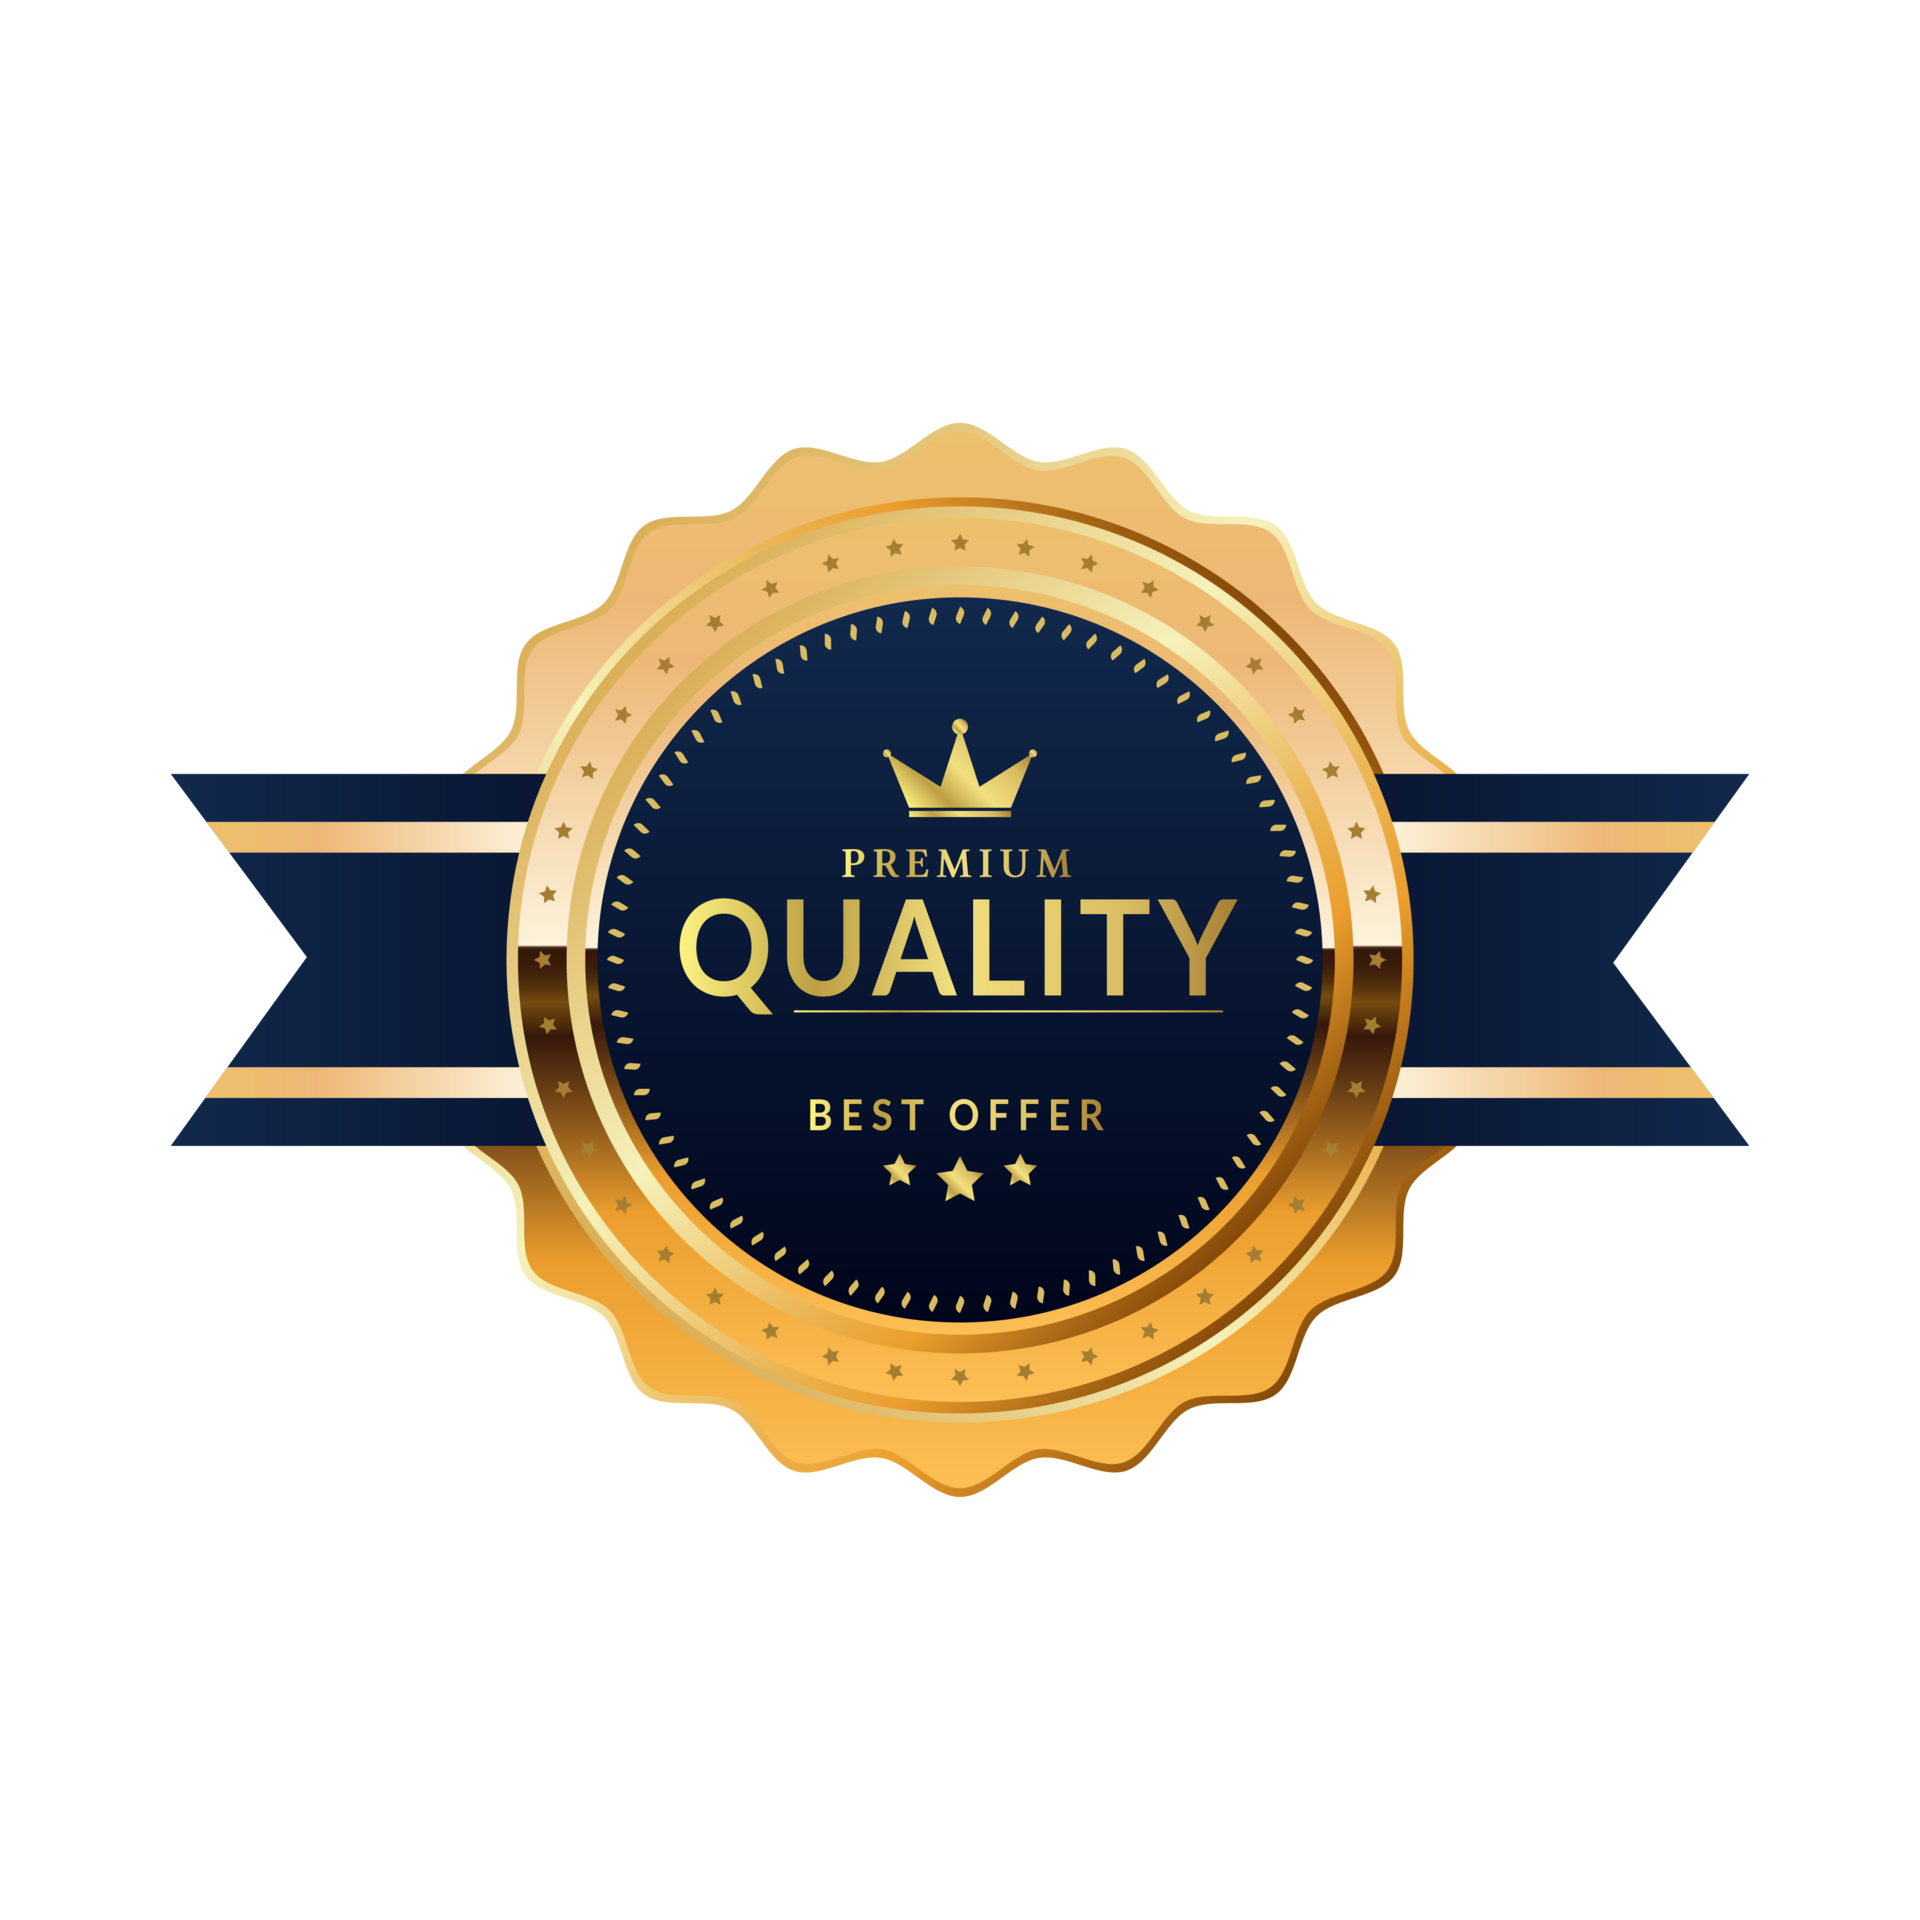 Premium Quality Badge With Blue And Gold Color 13195630 Png